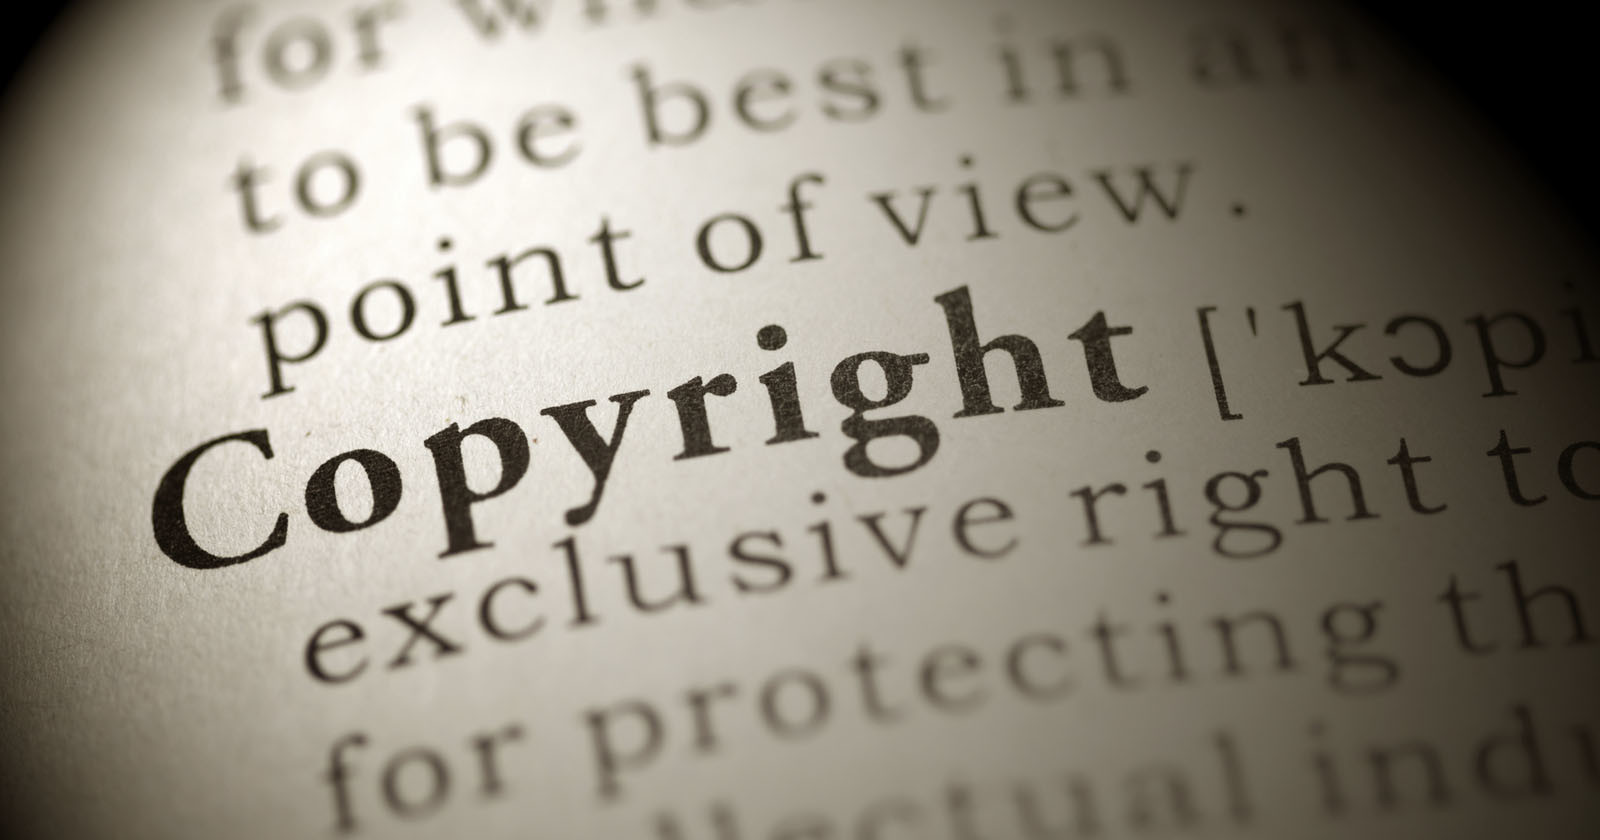  copyright trolls are suing people over creative commons 